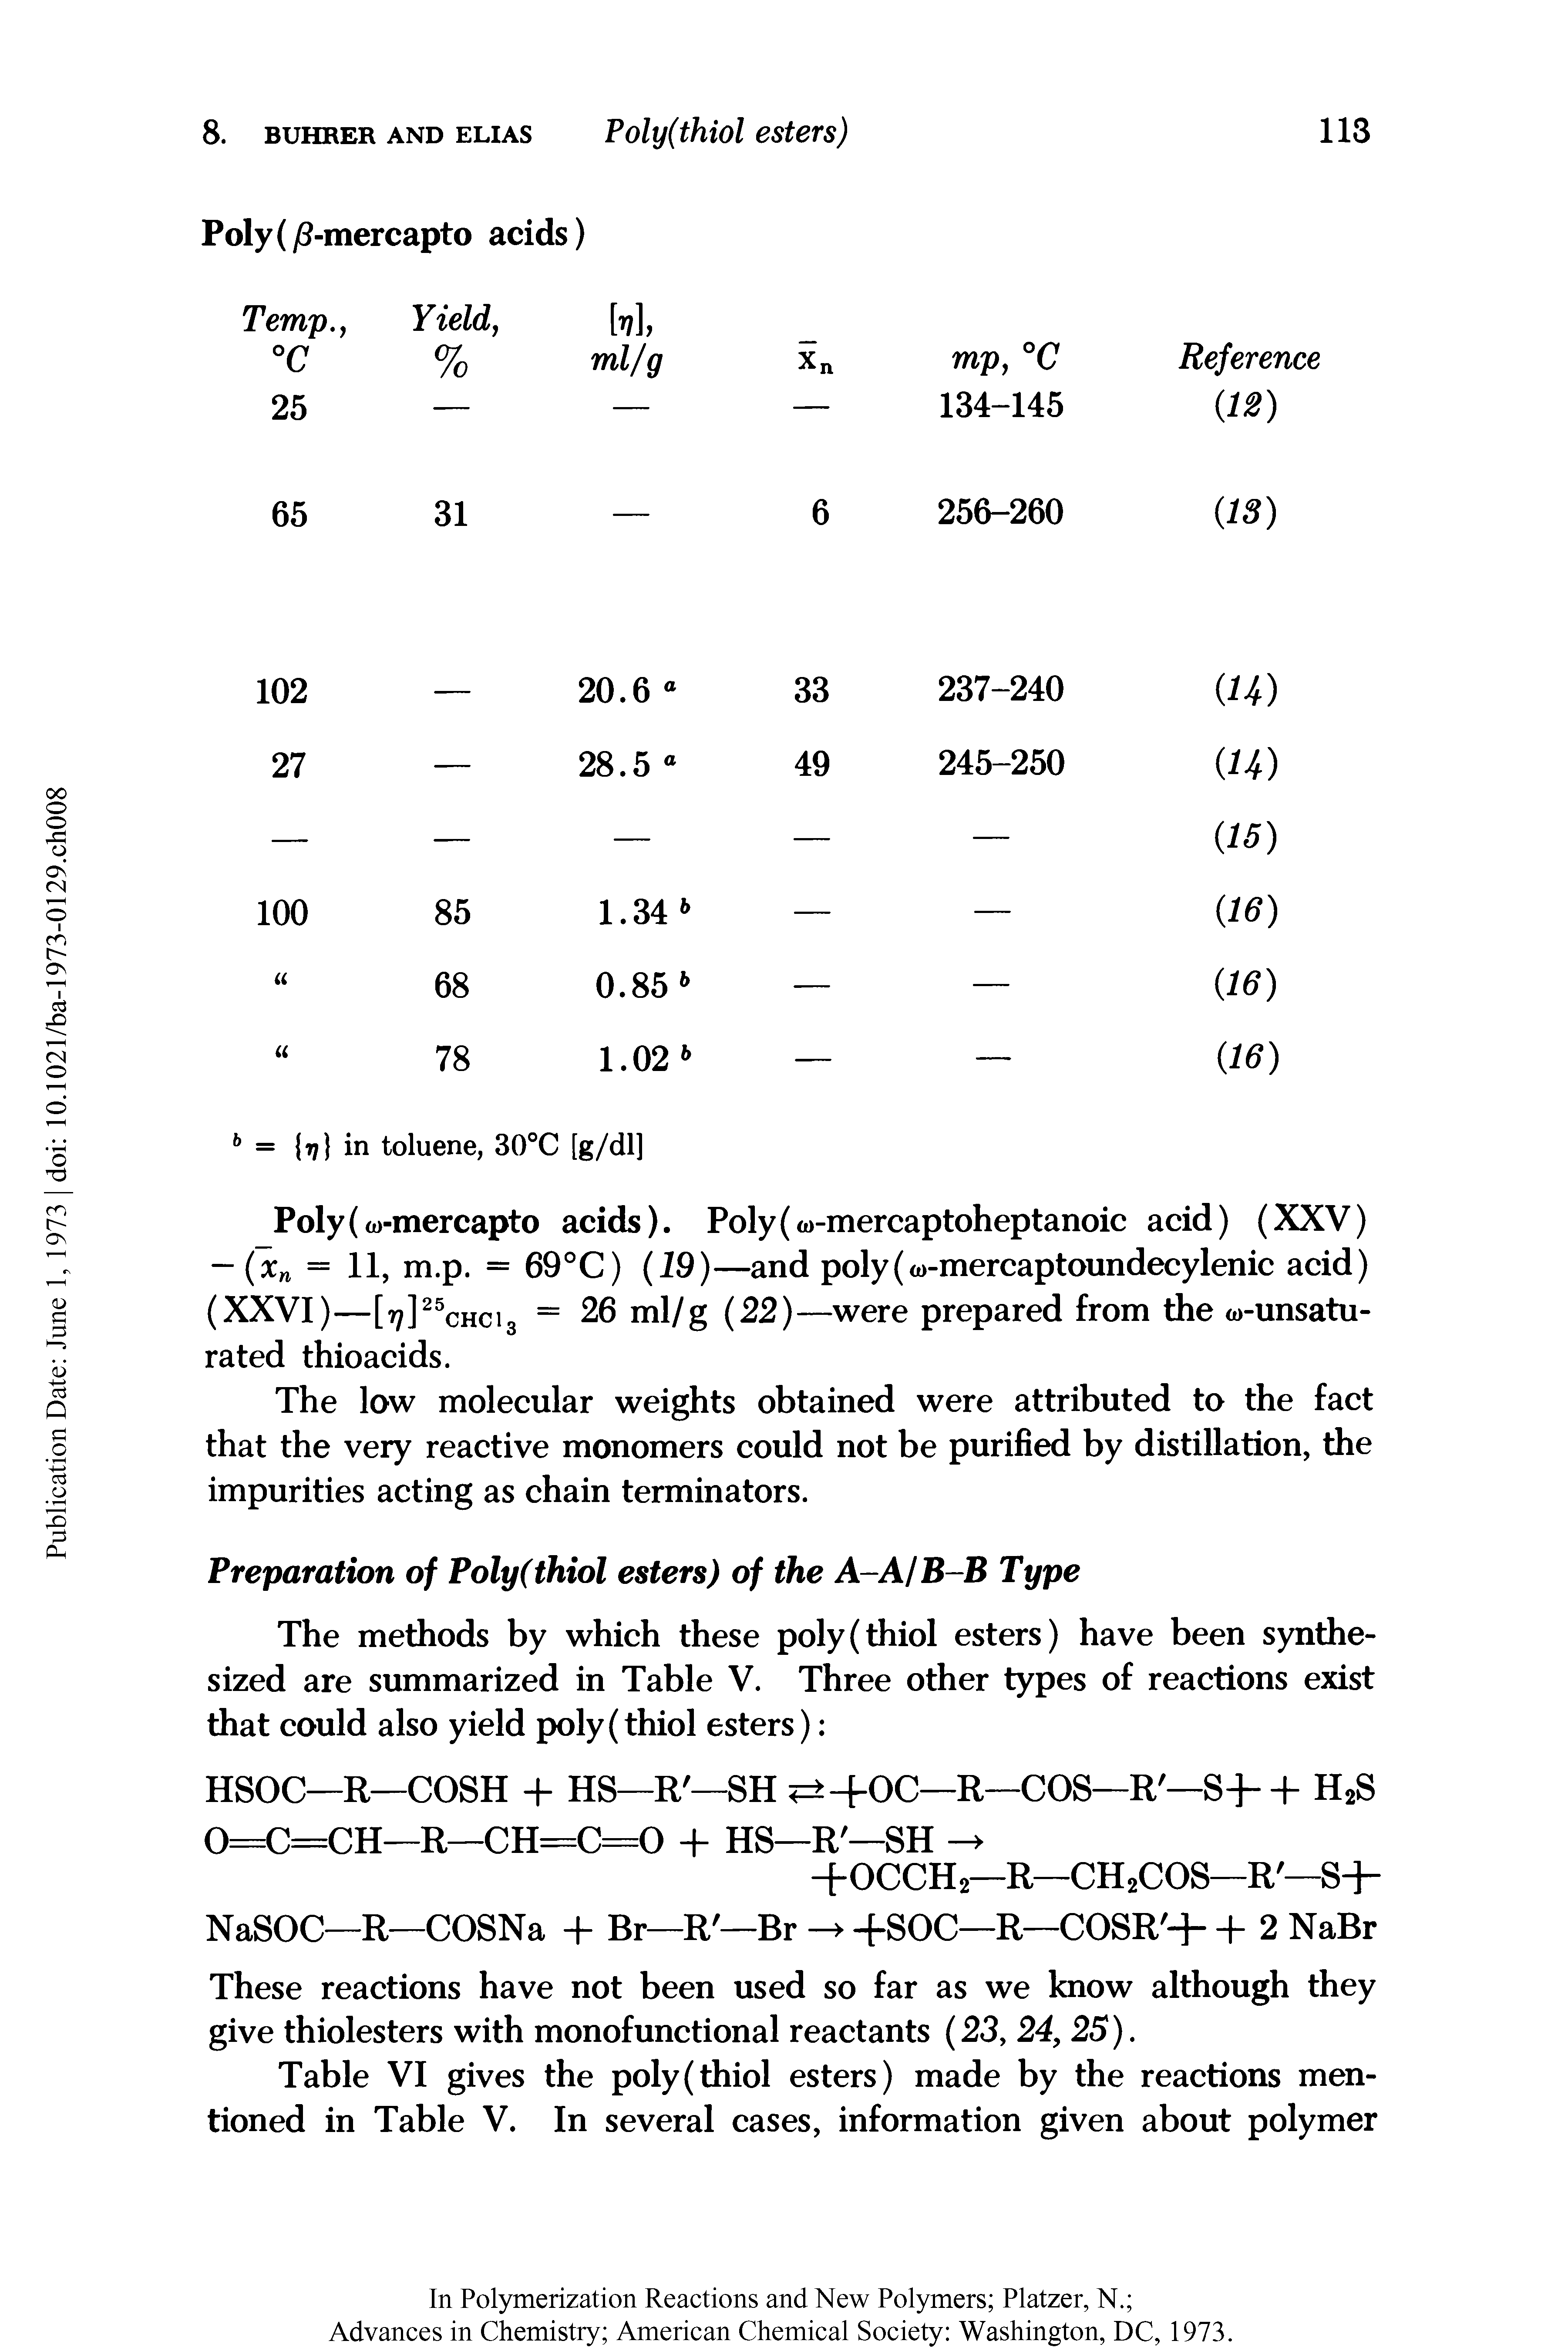 Table VI gives the poly (thiol esters) made by the reactions mentioned in Table V. In several cases, information given about polymer...